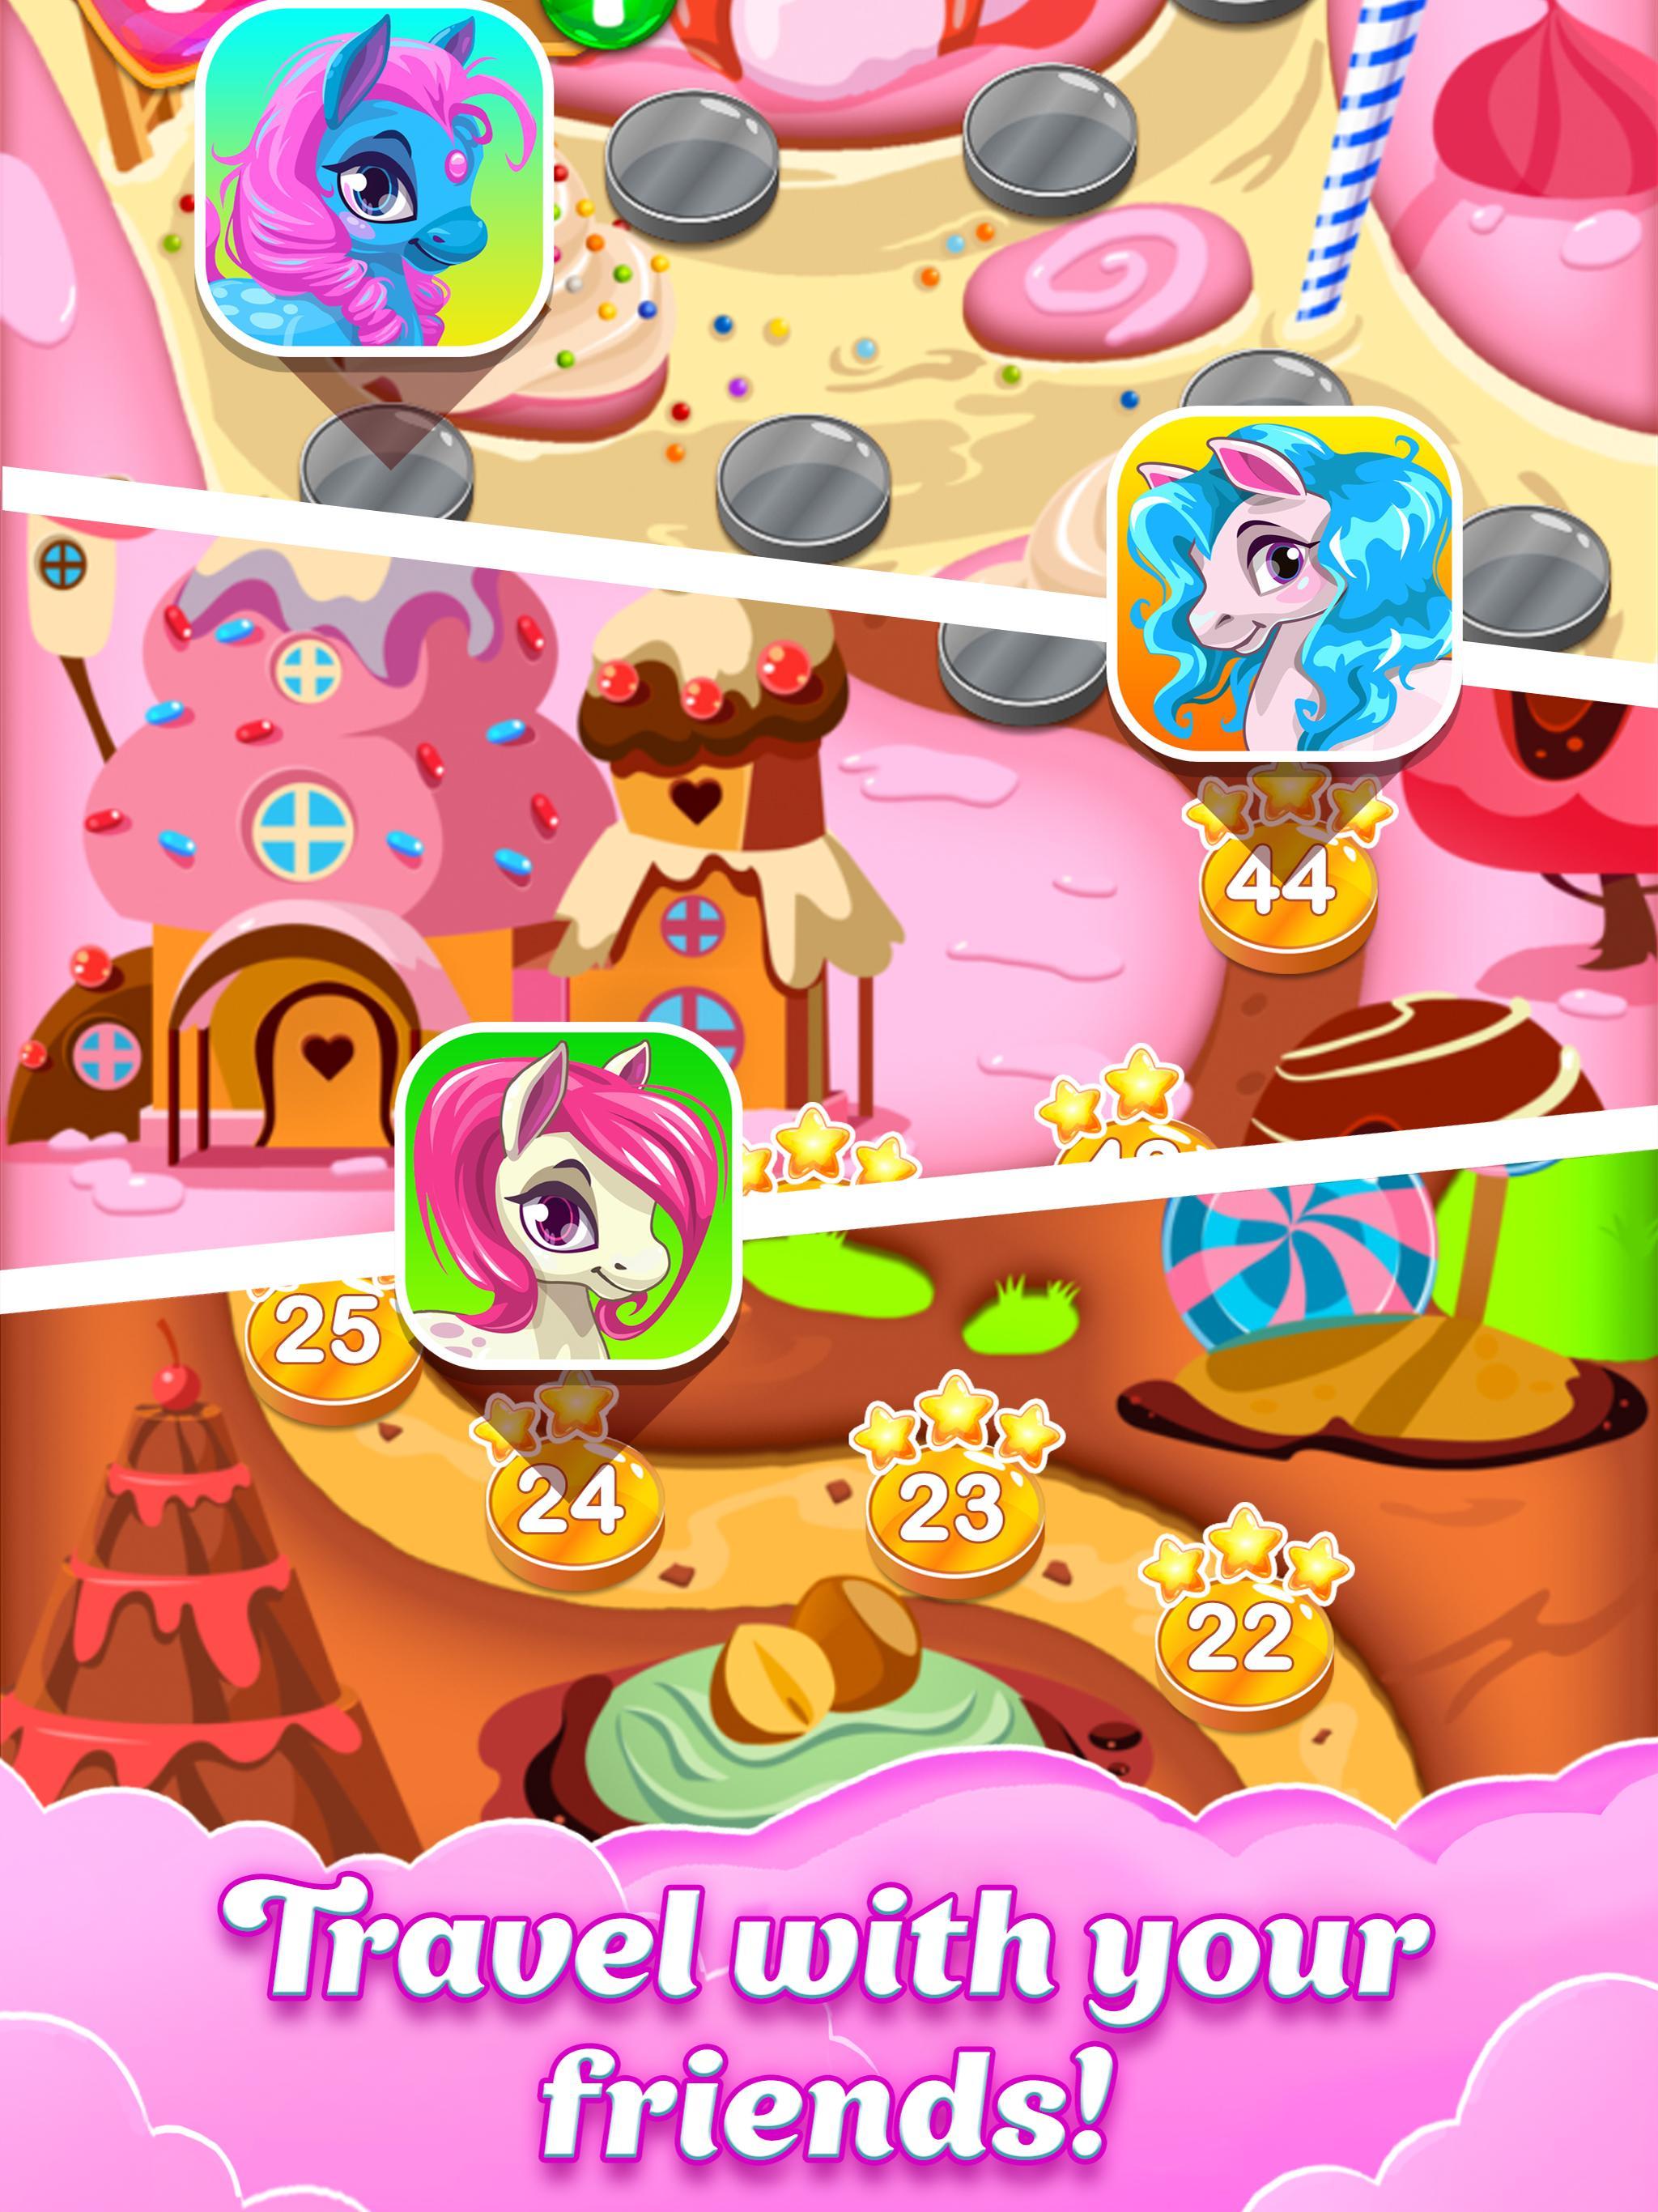 3 Сandy: Pony Tale - Free puzzle games for girls for Android - APK Download